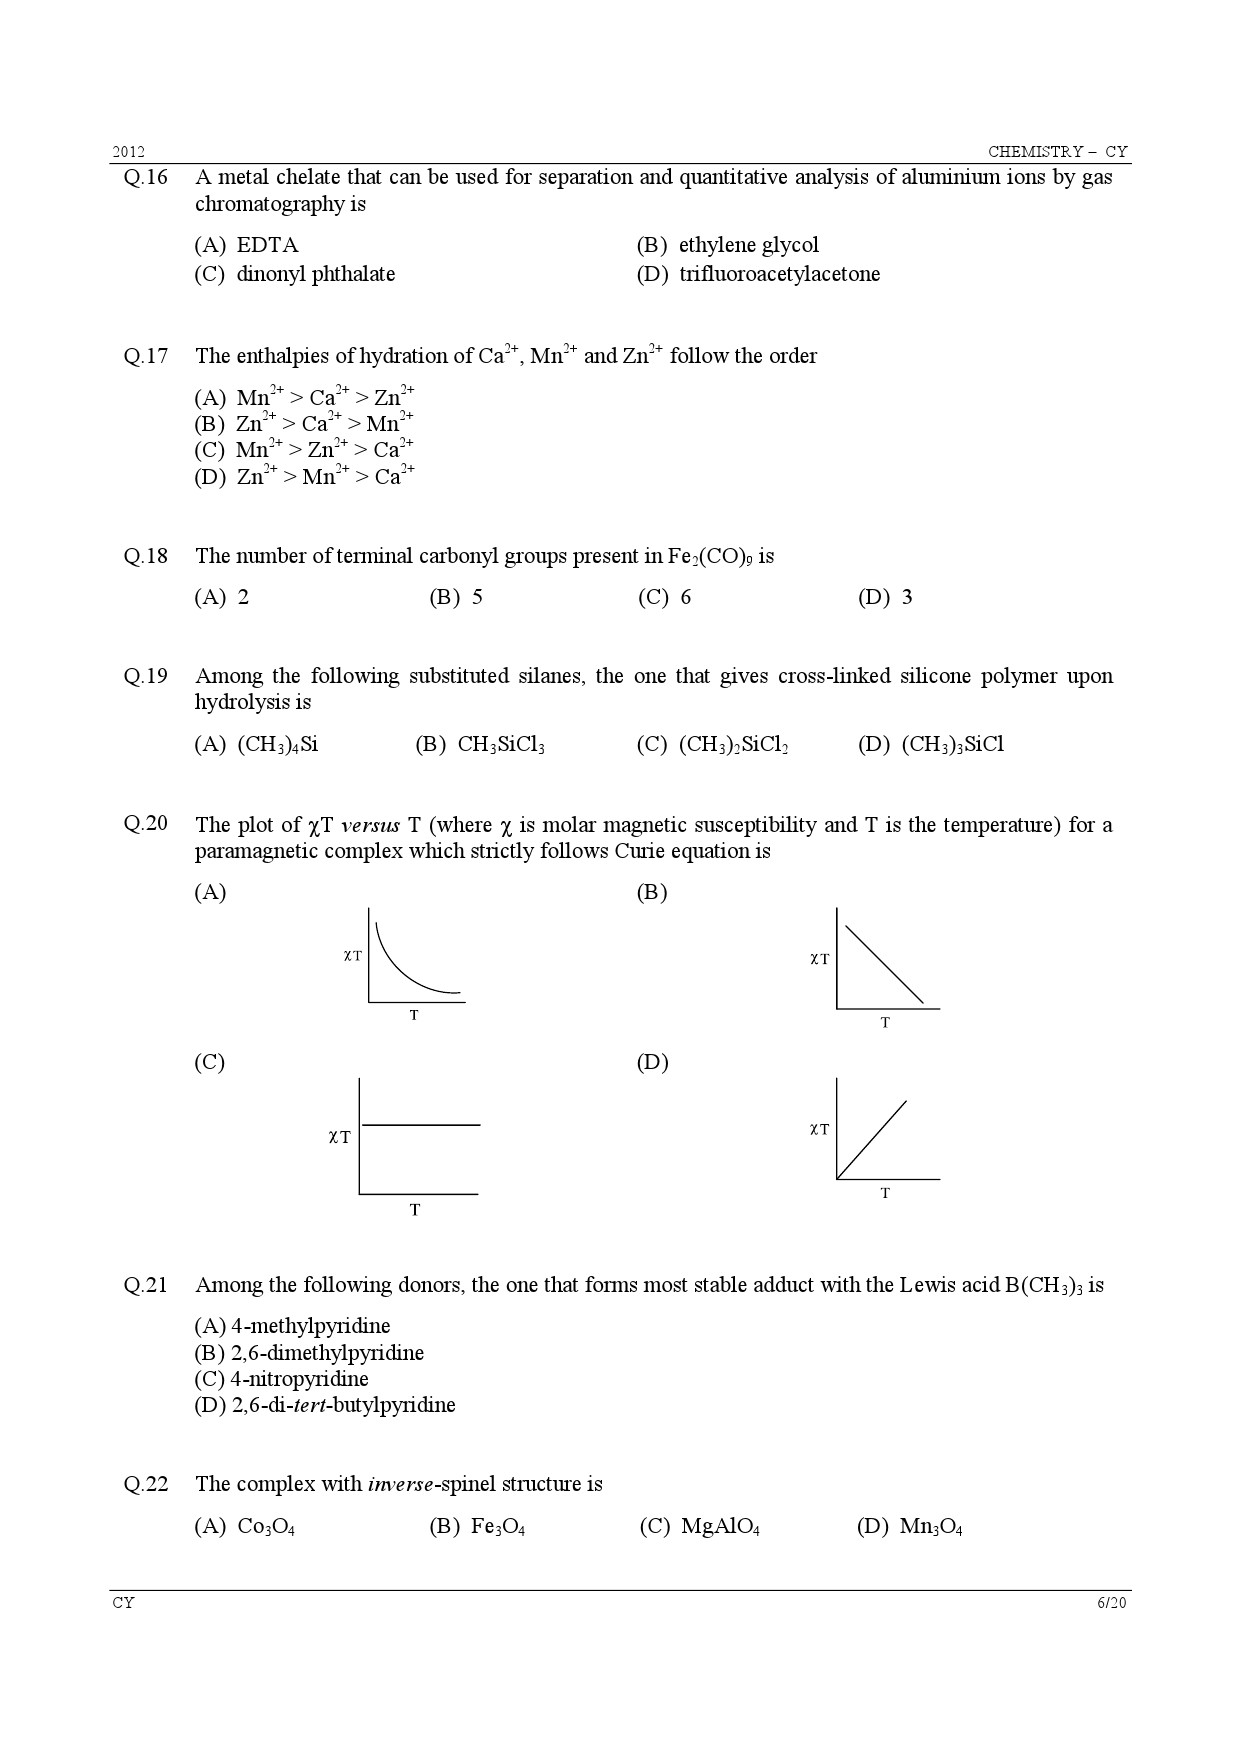 GATE Exam Question Paper 2012 Chemistry 6